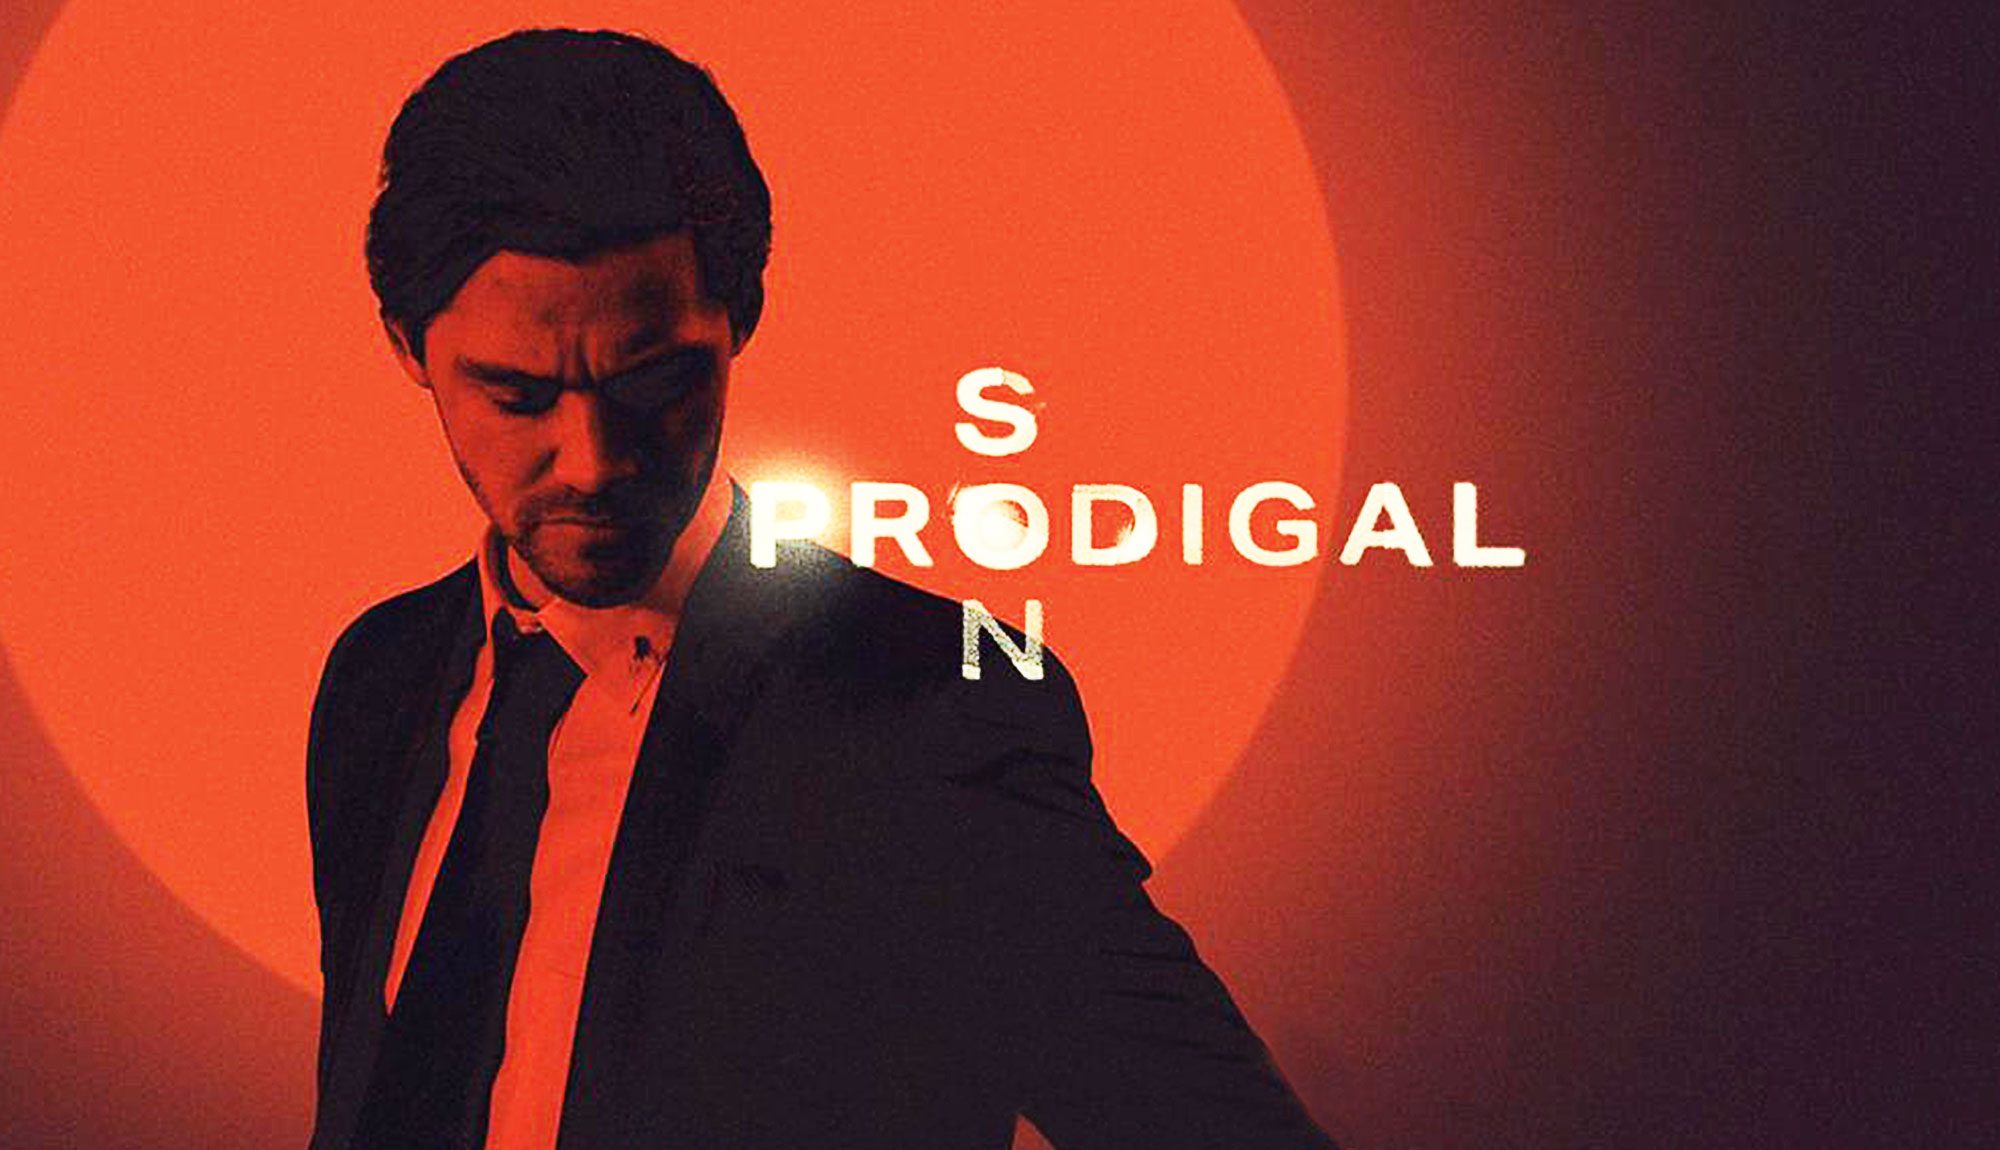 Tom Payne’s New FOX Show “Prodigal Son” Picked Up For Full Series